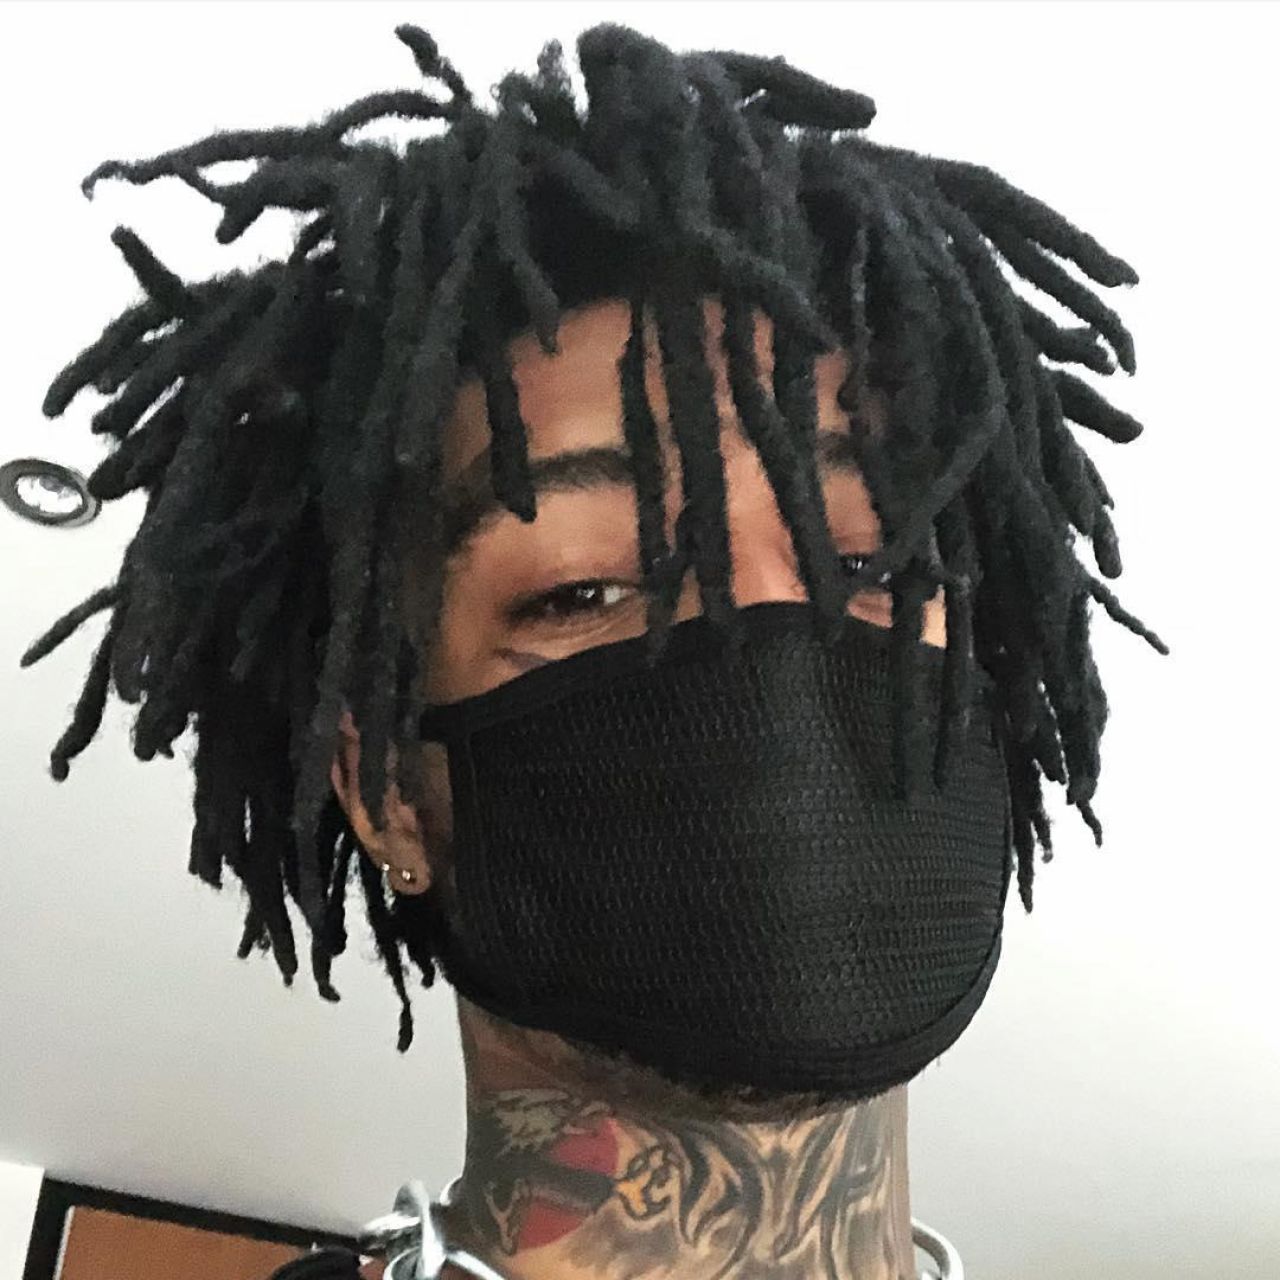 Black Mouth Mask worn by Scarlxrd on his Instagram account @scarlxrd.